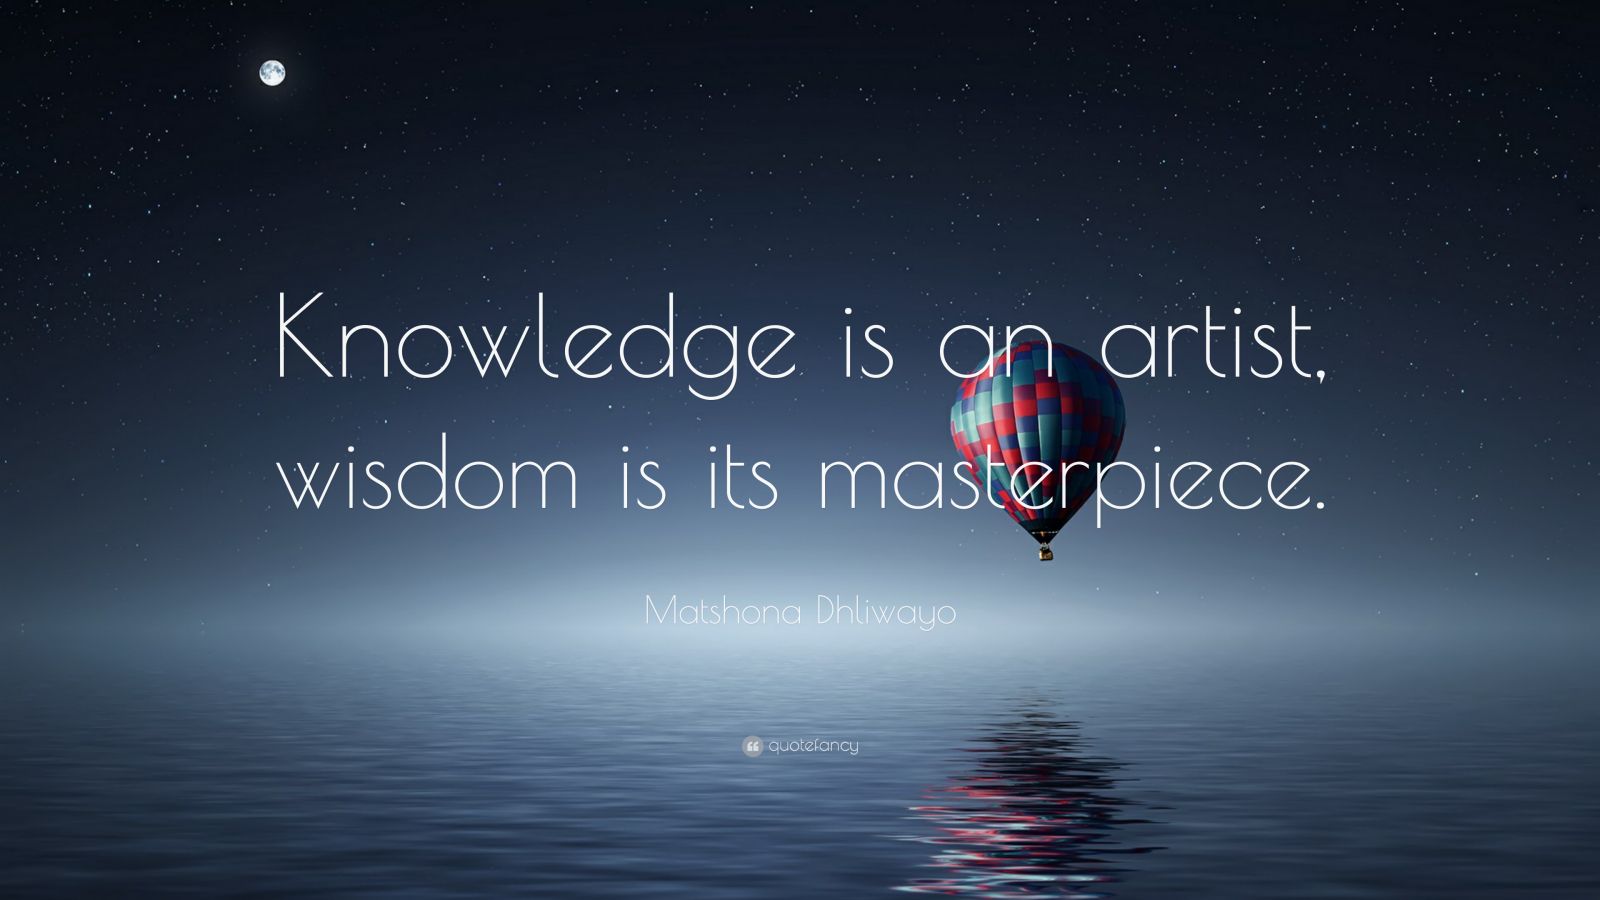 Matshona Dhliwayo Quote: “Knowledge is better than silver, wisdom